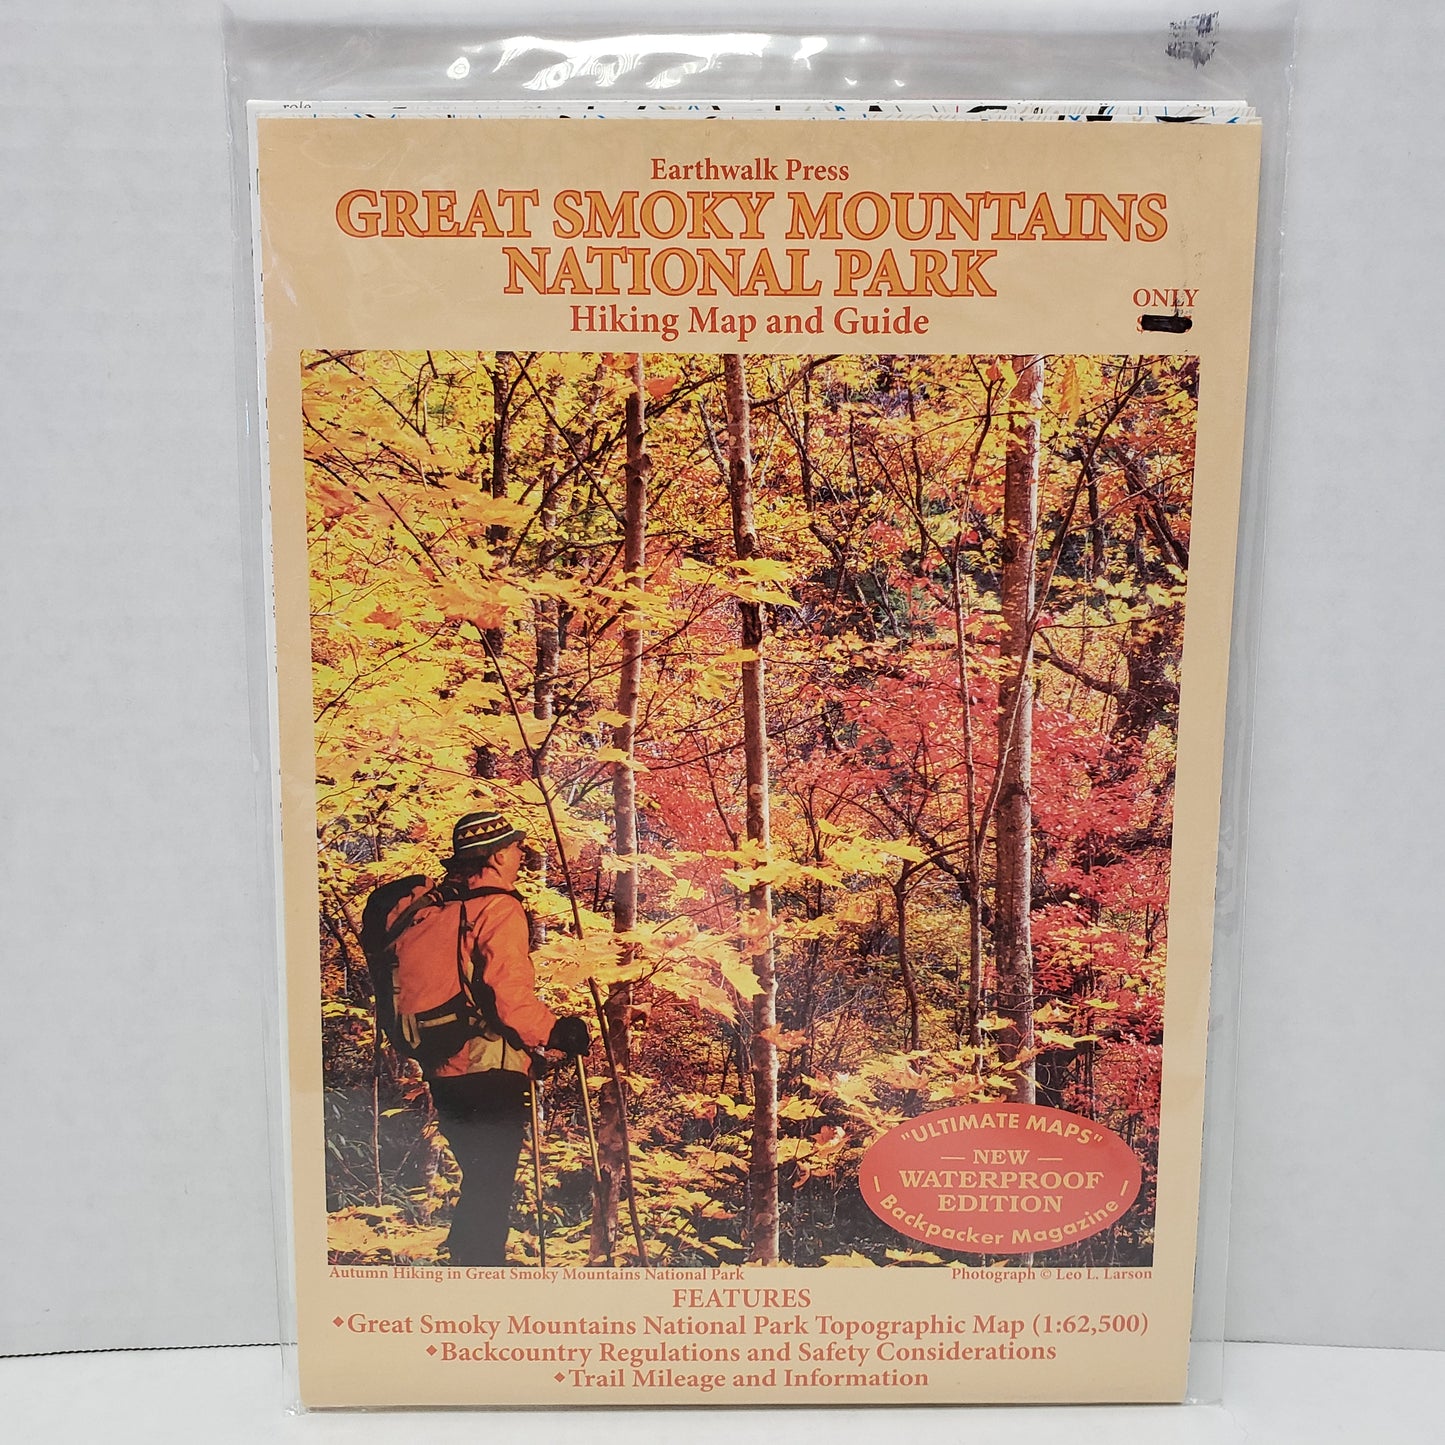 Great Smoky Mountains National Park Hiking Map and Guide